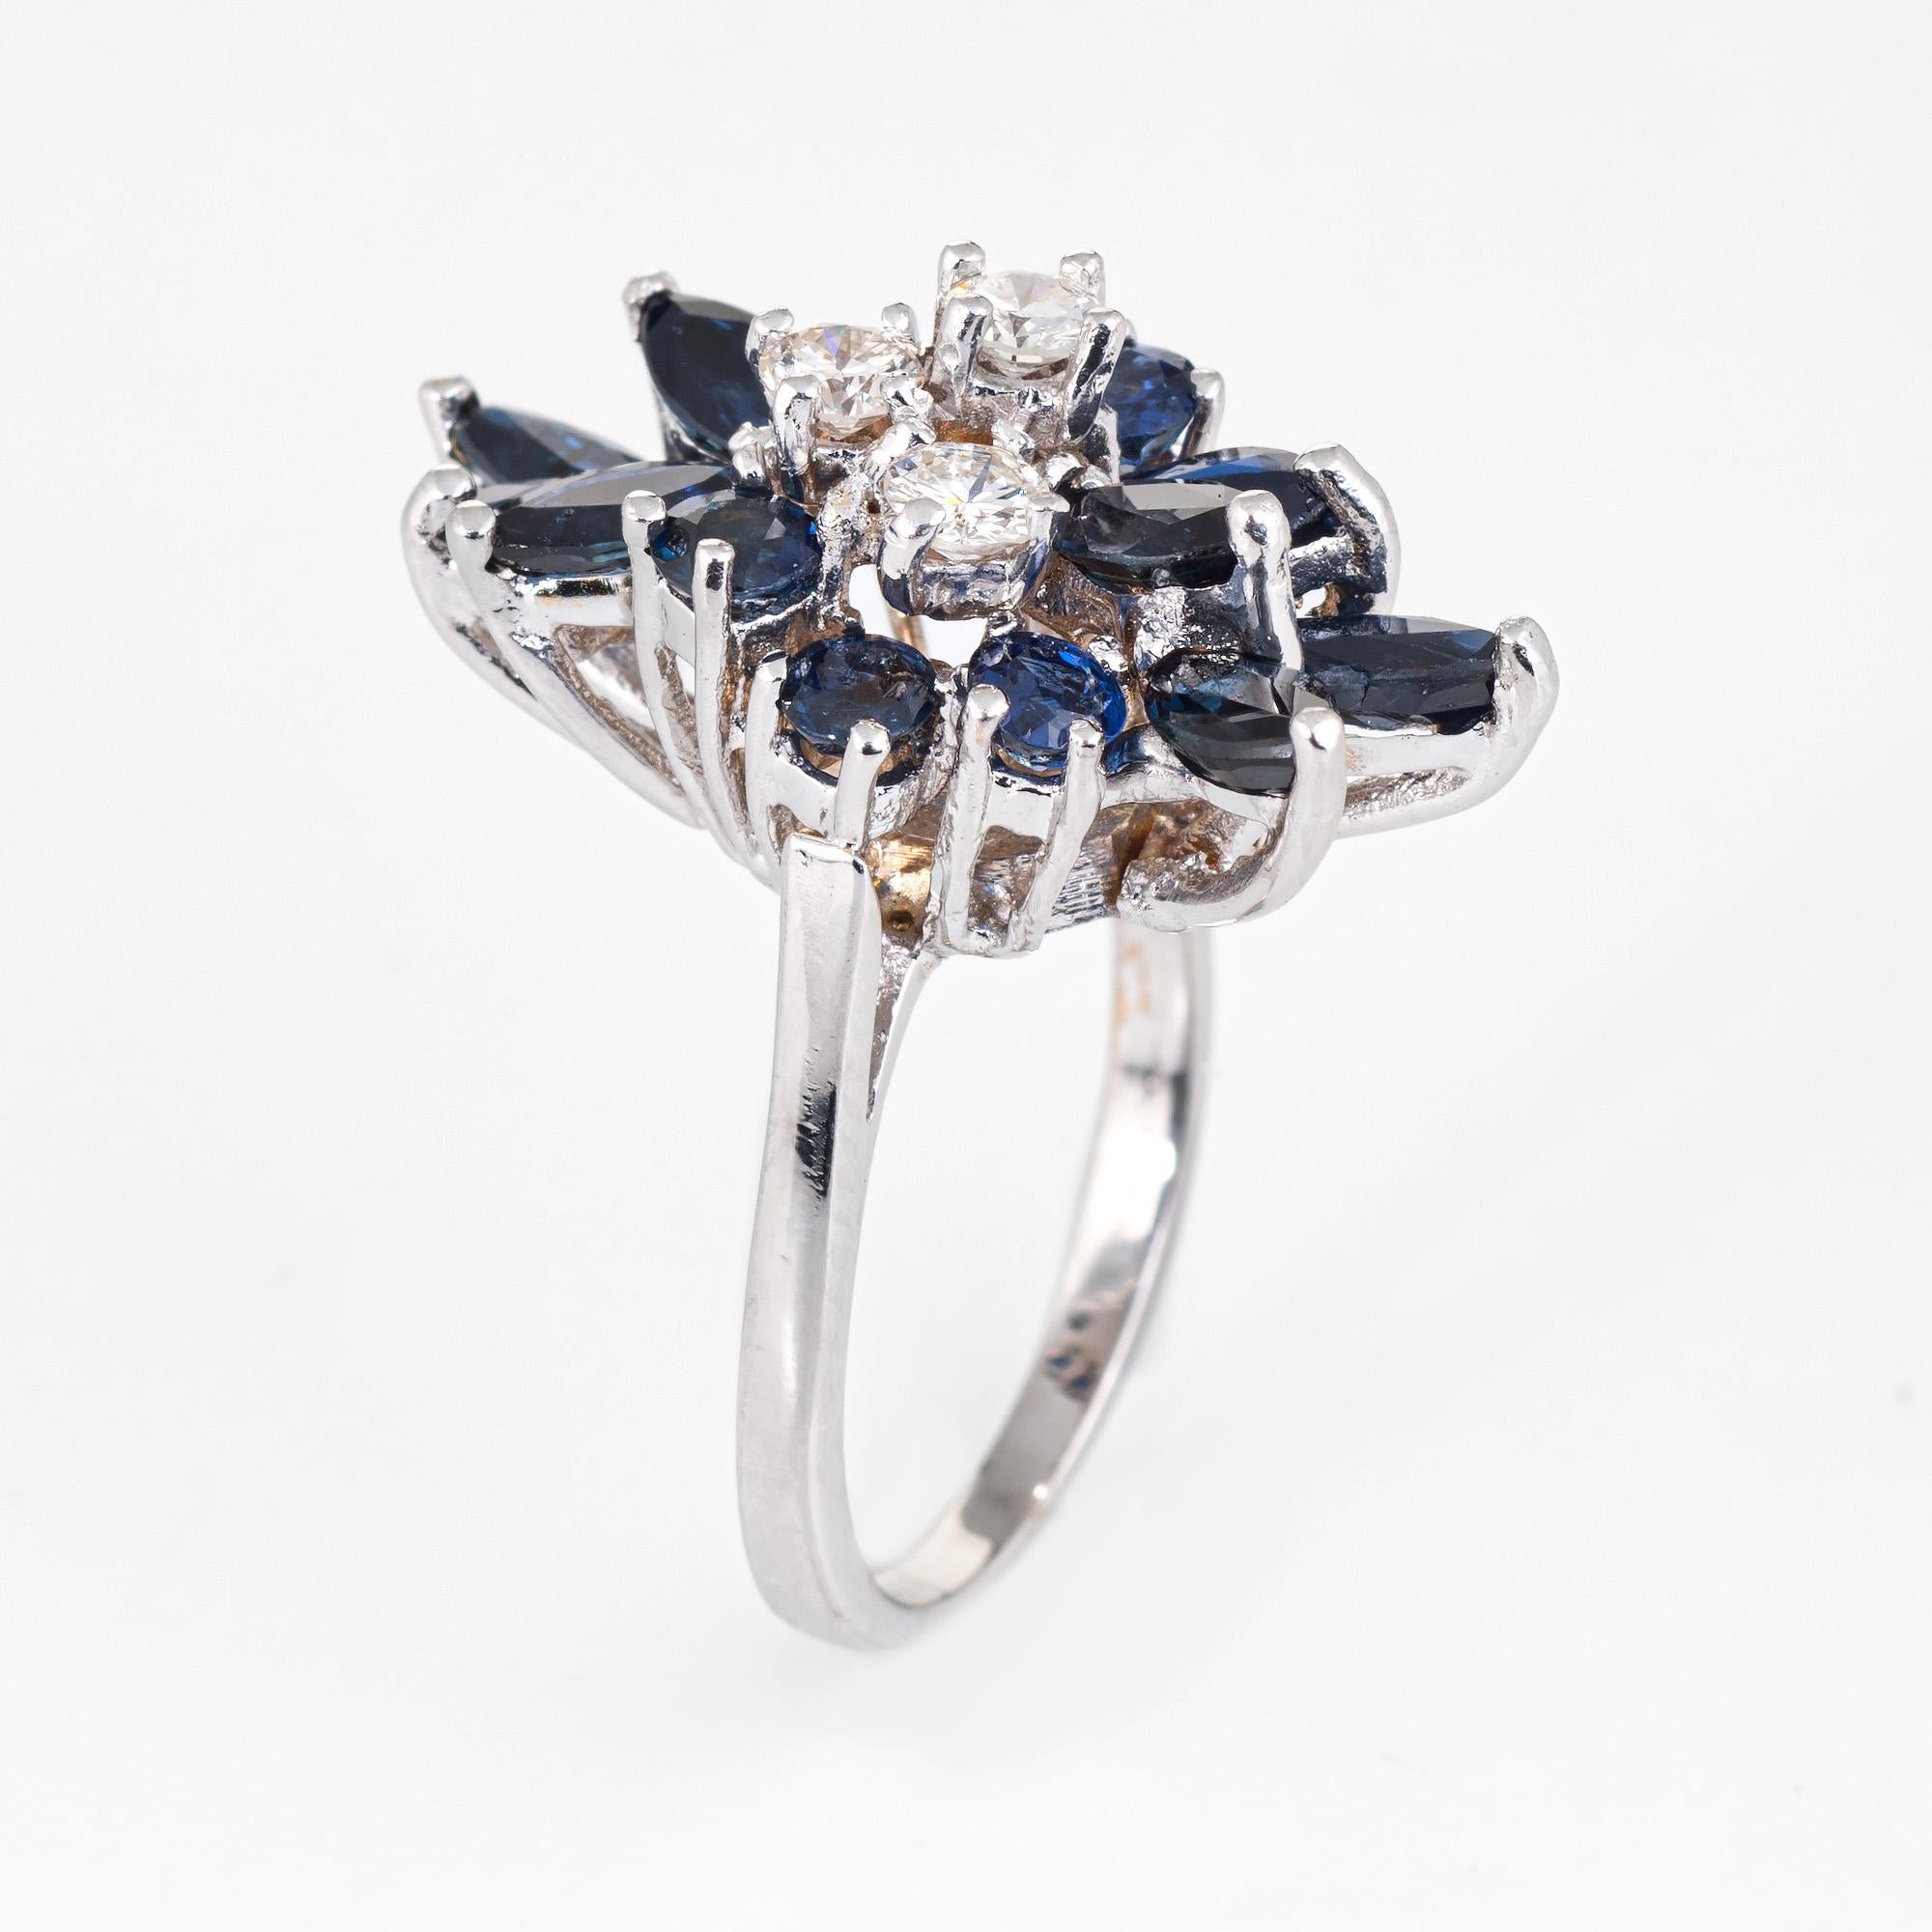 Elegant vintage sapphire & diamond cocktail ring (circa 1960s to 1970s), crafted in 14 karat white gold. 

Marquise and round cut sapphires total an estimated 2.35 carats, accented with an estimated 0.30 carats of diamonds (estimated at I-J color